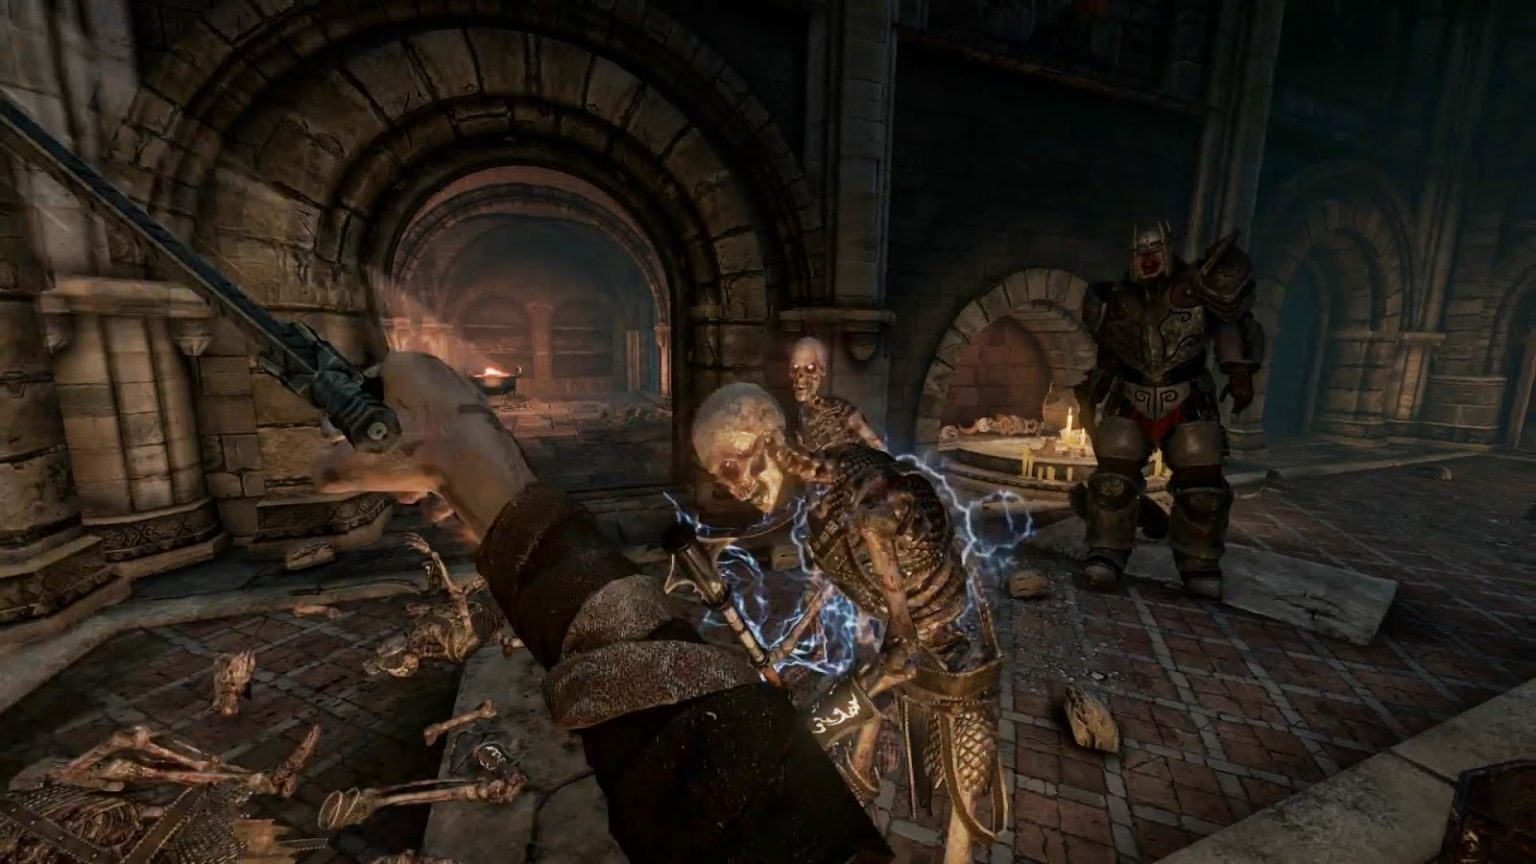 dying light hellraid lord hectors demise